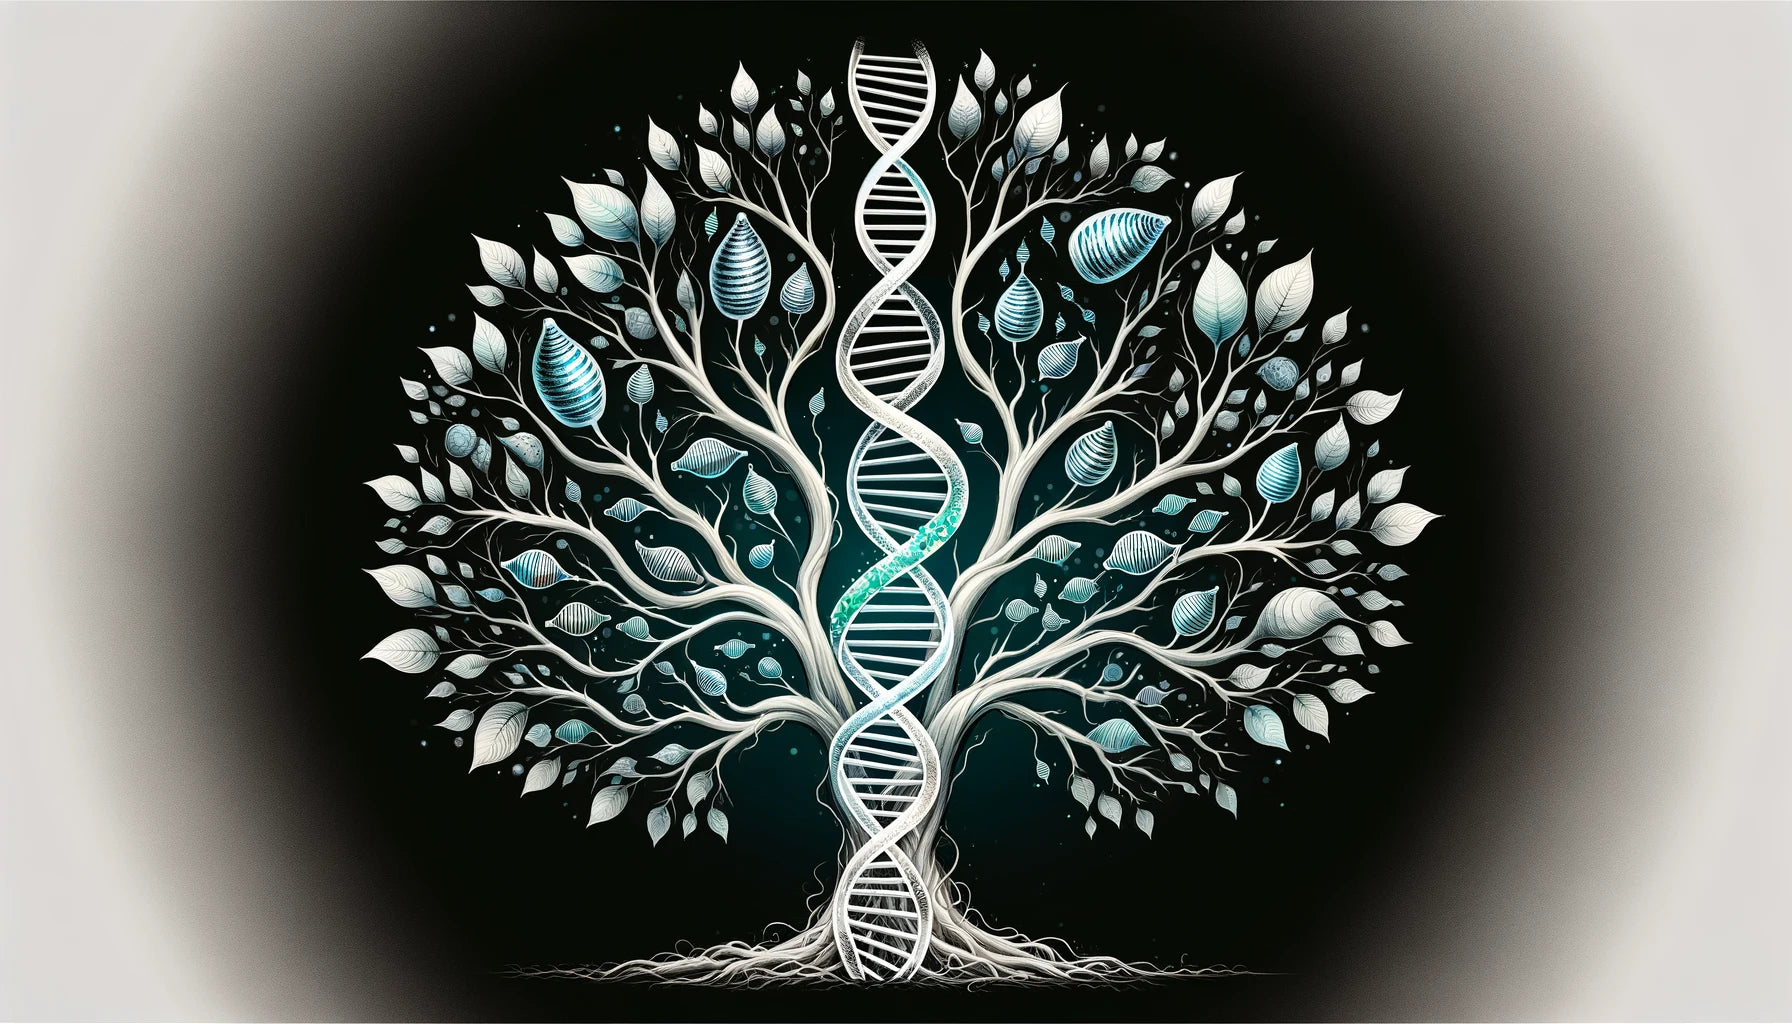 family tree design with DNA helixes on skin healing heritage